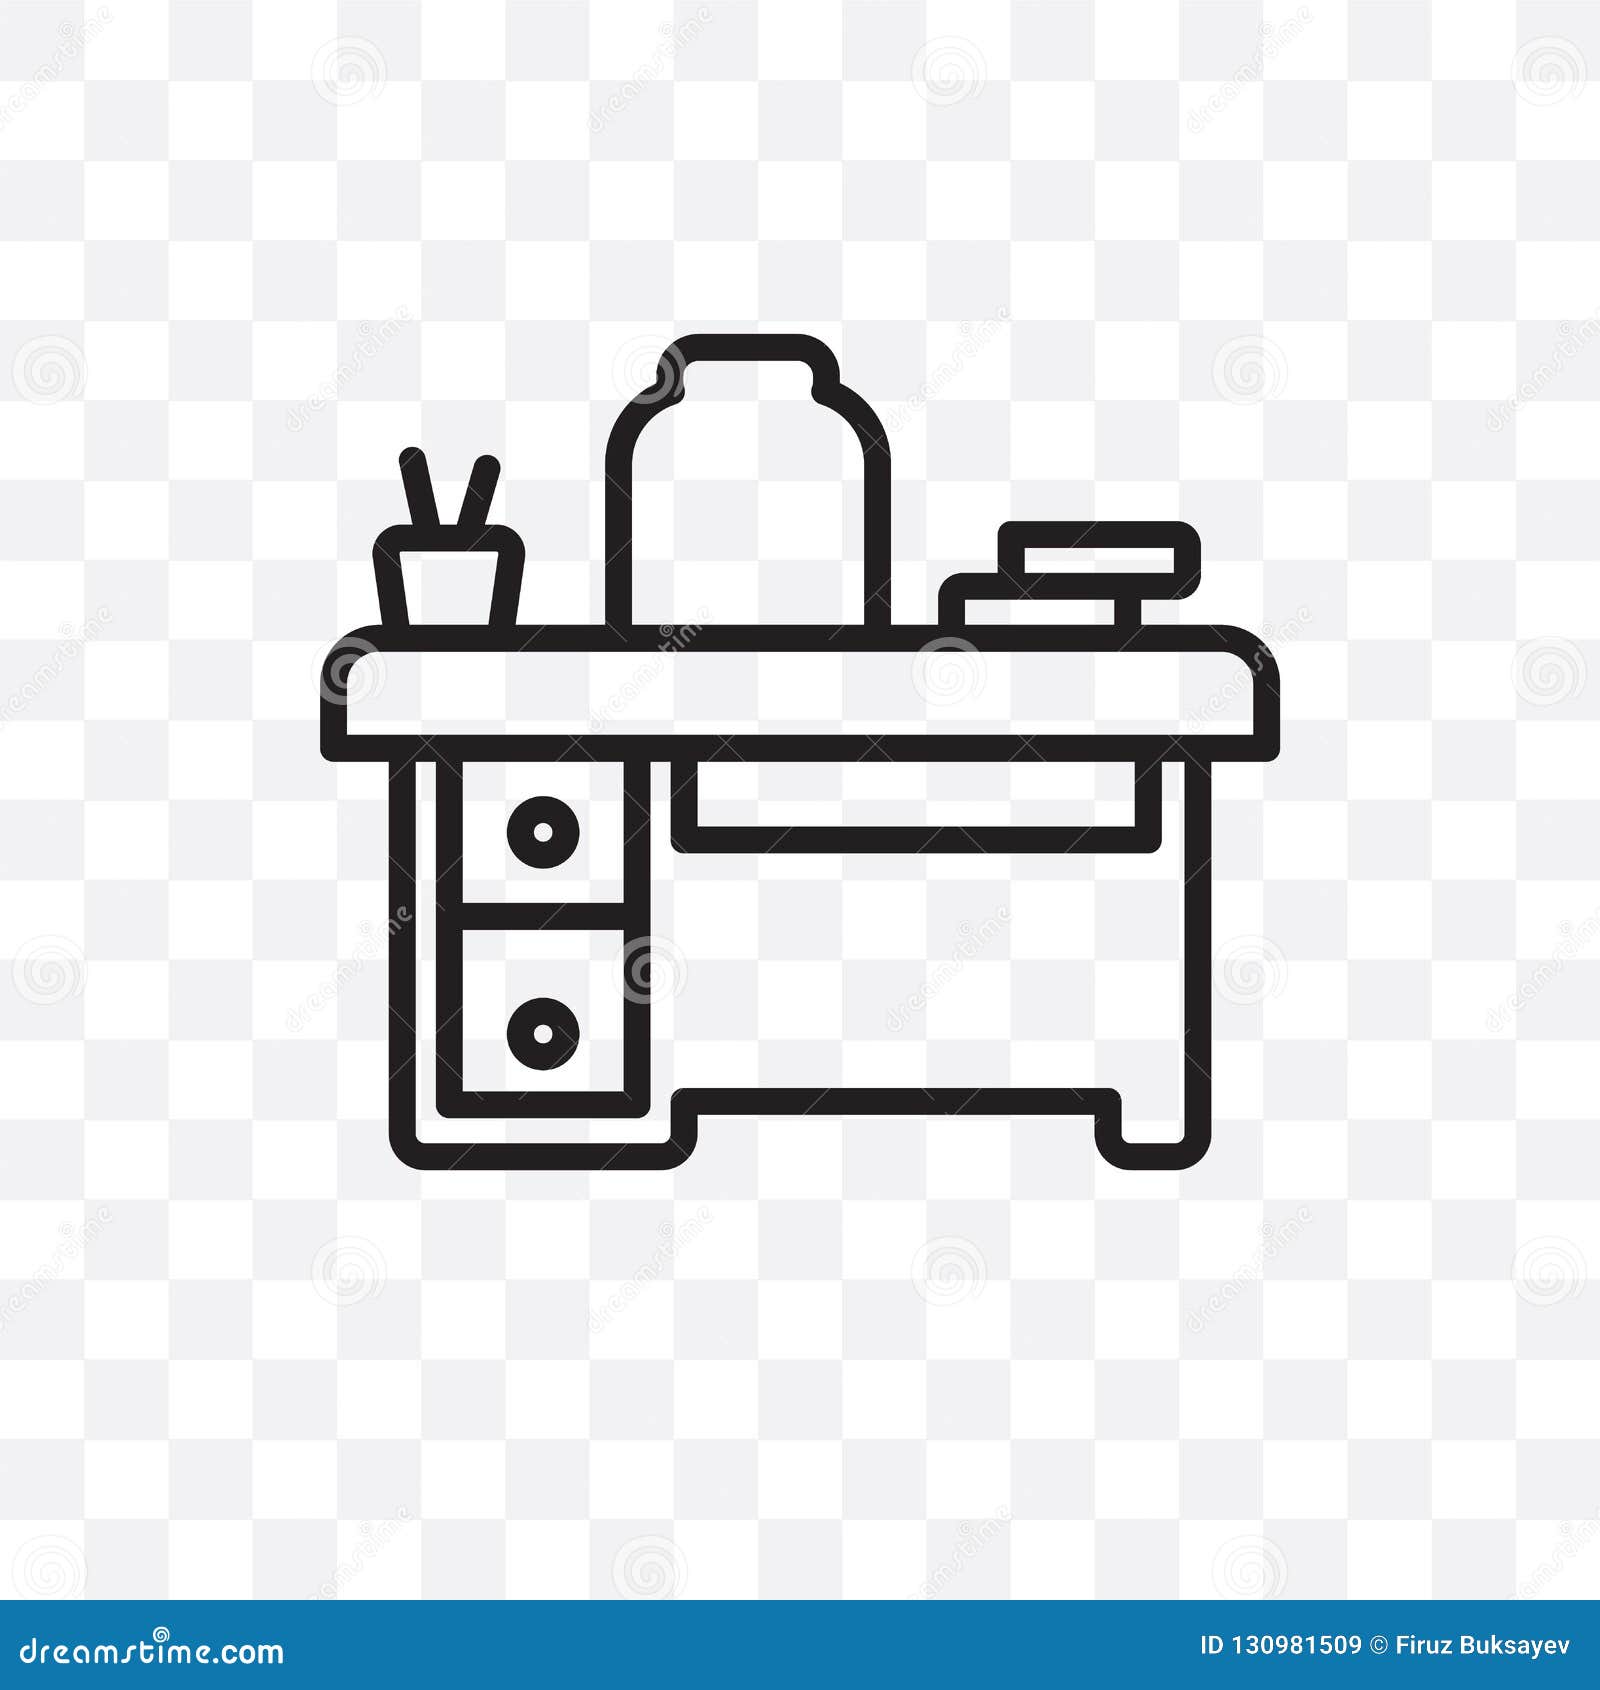 Teacher Desk Vector Linear Icon Isolated On Transparent Background